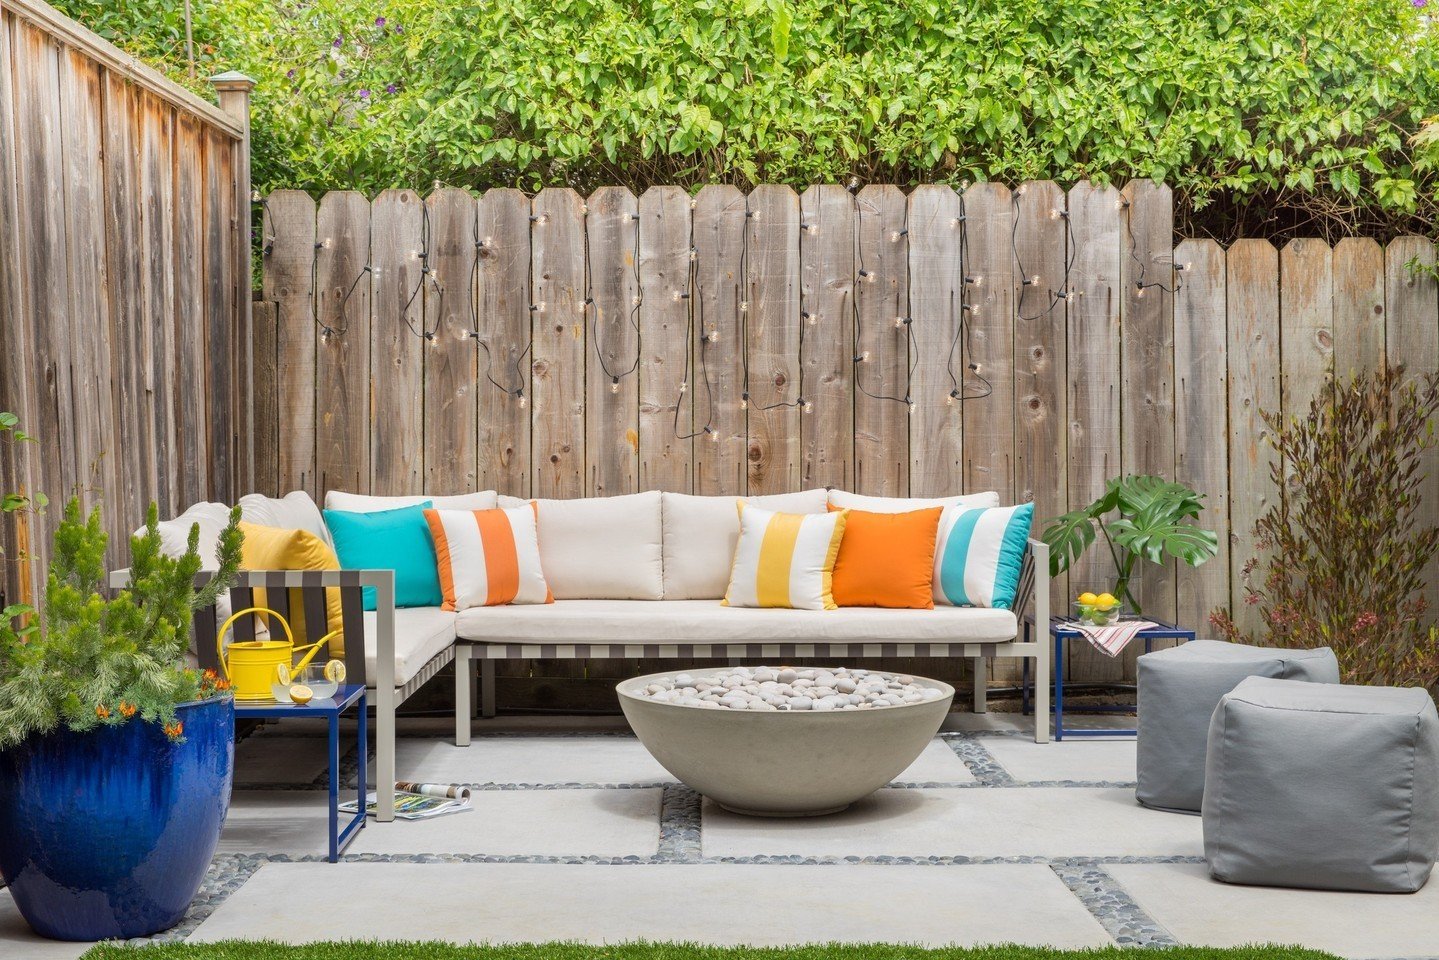 This not a drill: ⁠Summer is days away!  Spruce up your yard with these easy upgrades:  Cafe lights, propane fire pit, and plenty of seating. Remember that stools can serve as side tables -- creating a flexible mix for endless lounging configurations